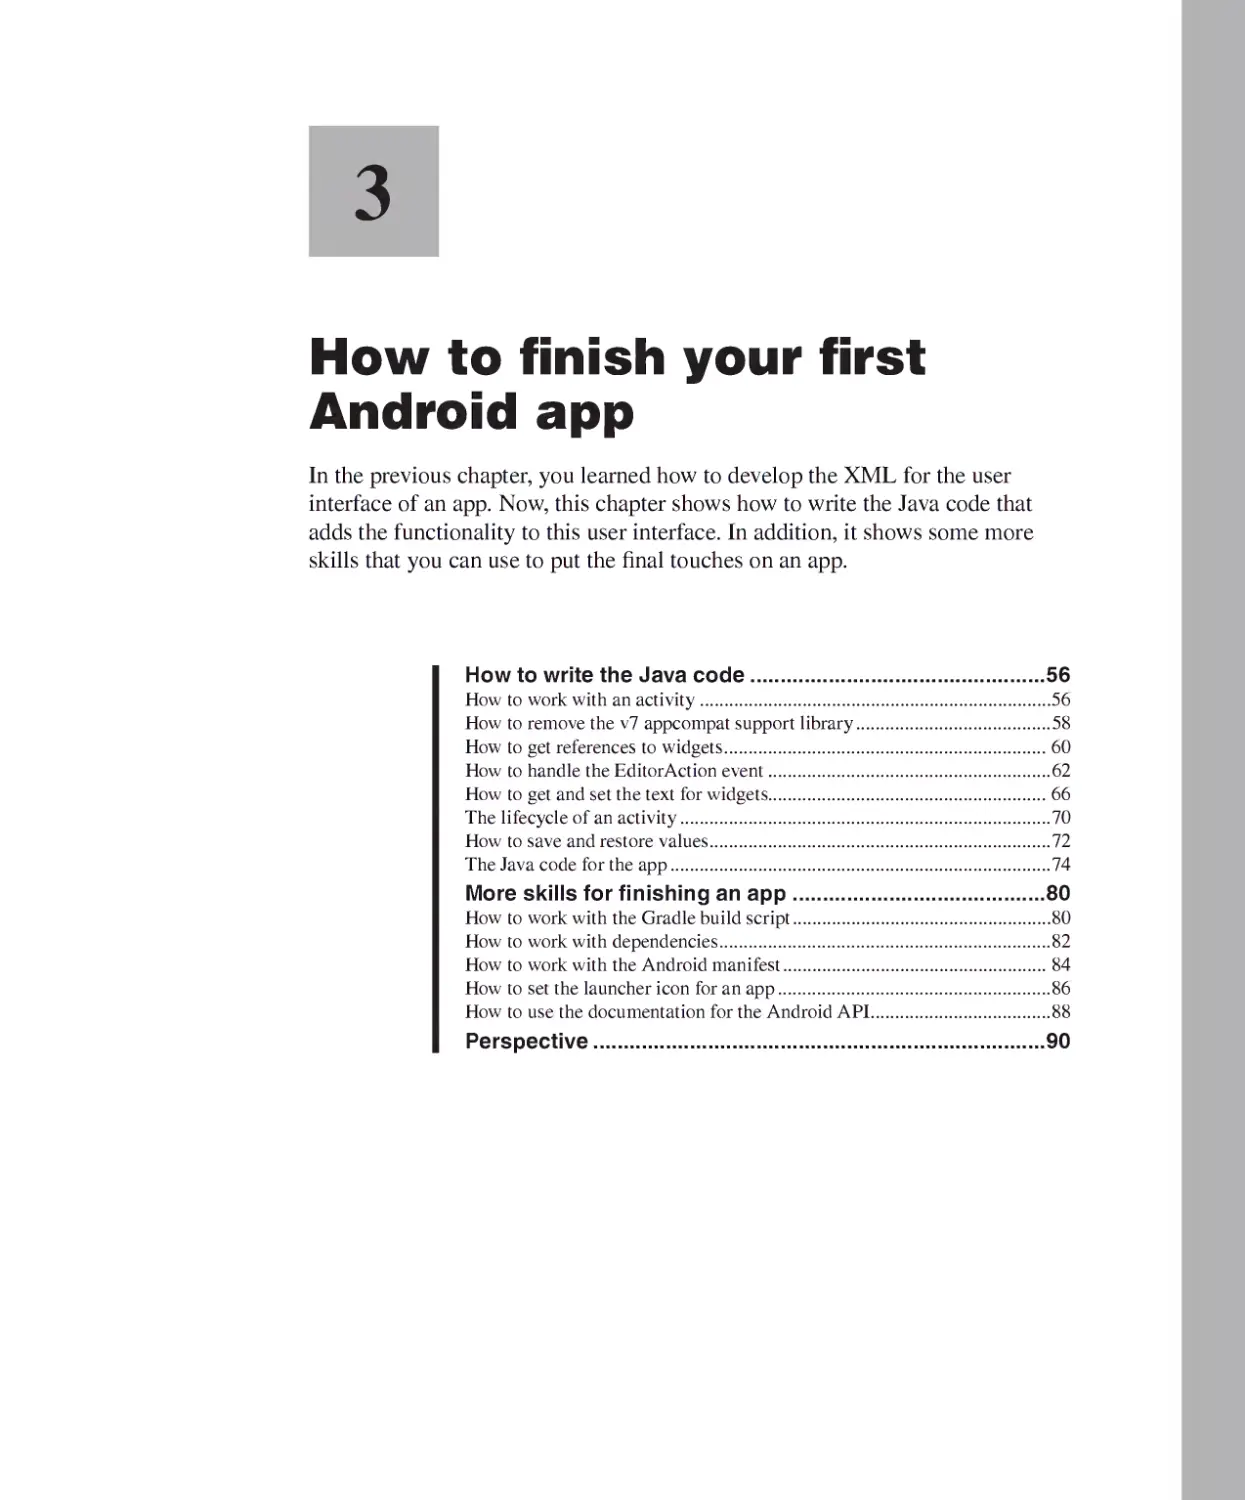 Chapter 3 - How to Finish Your First Android App